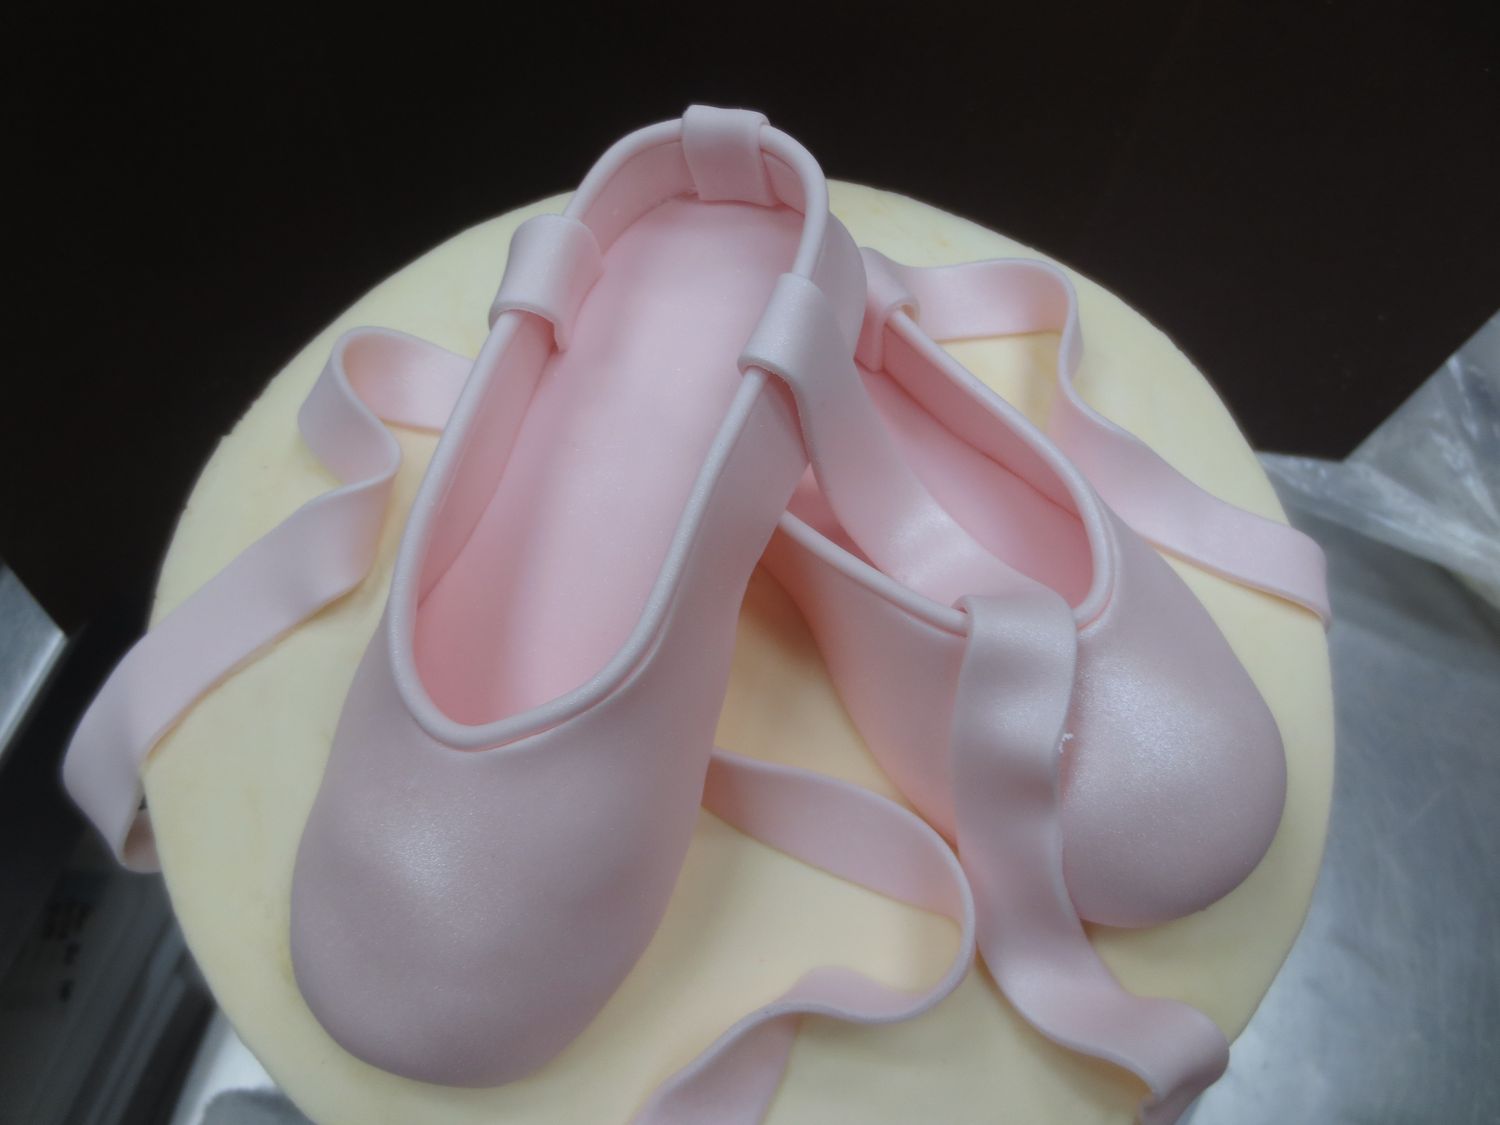 How To Make A Ballet Shoe Out Of Fondant